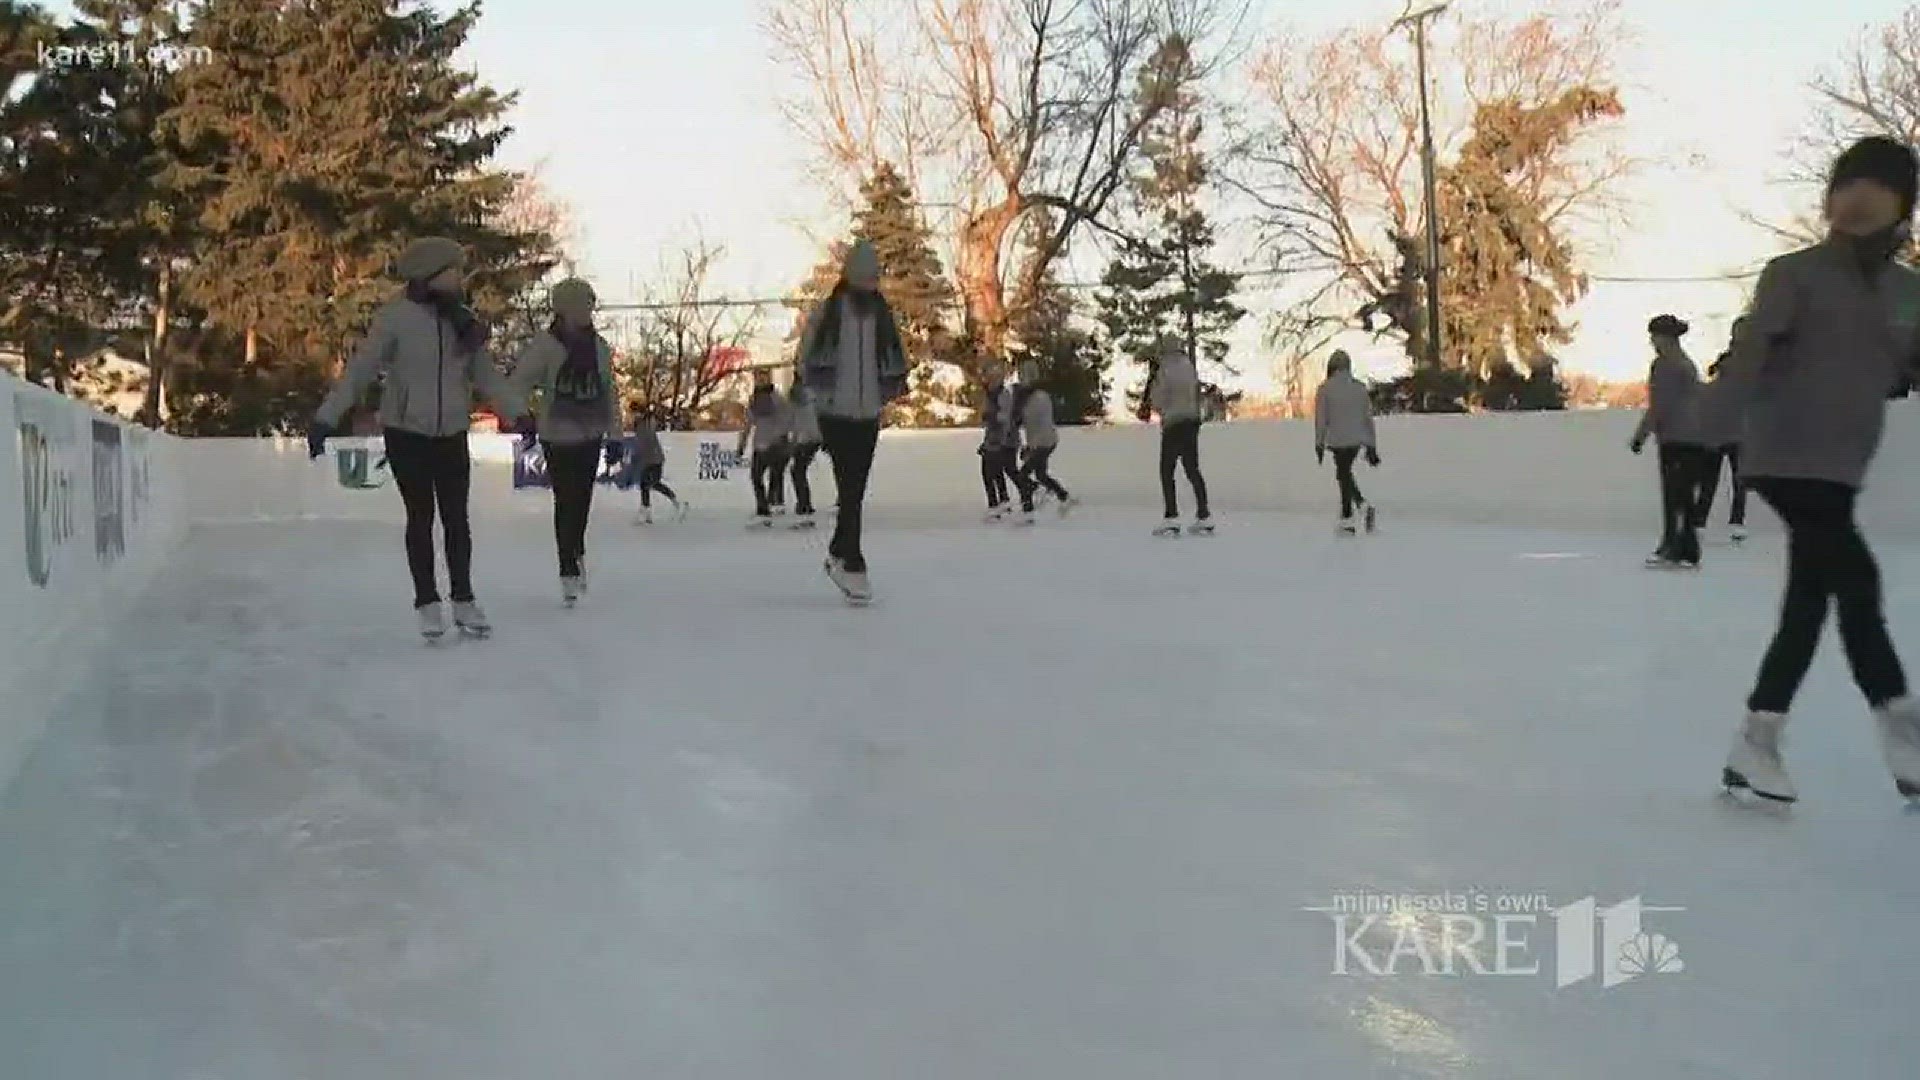 Karla Hult talks with the Braemar Panache Synchronized Skating Team at our KARE 11 Ice Desk.